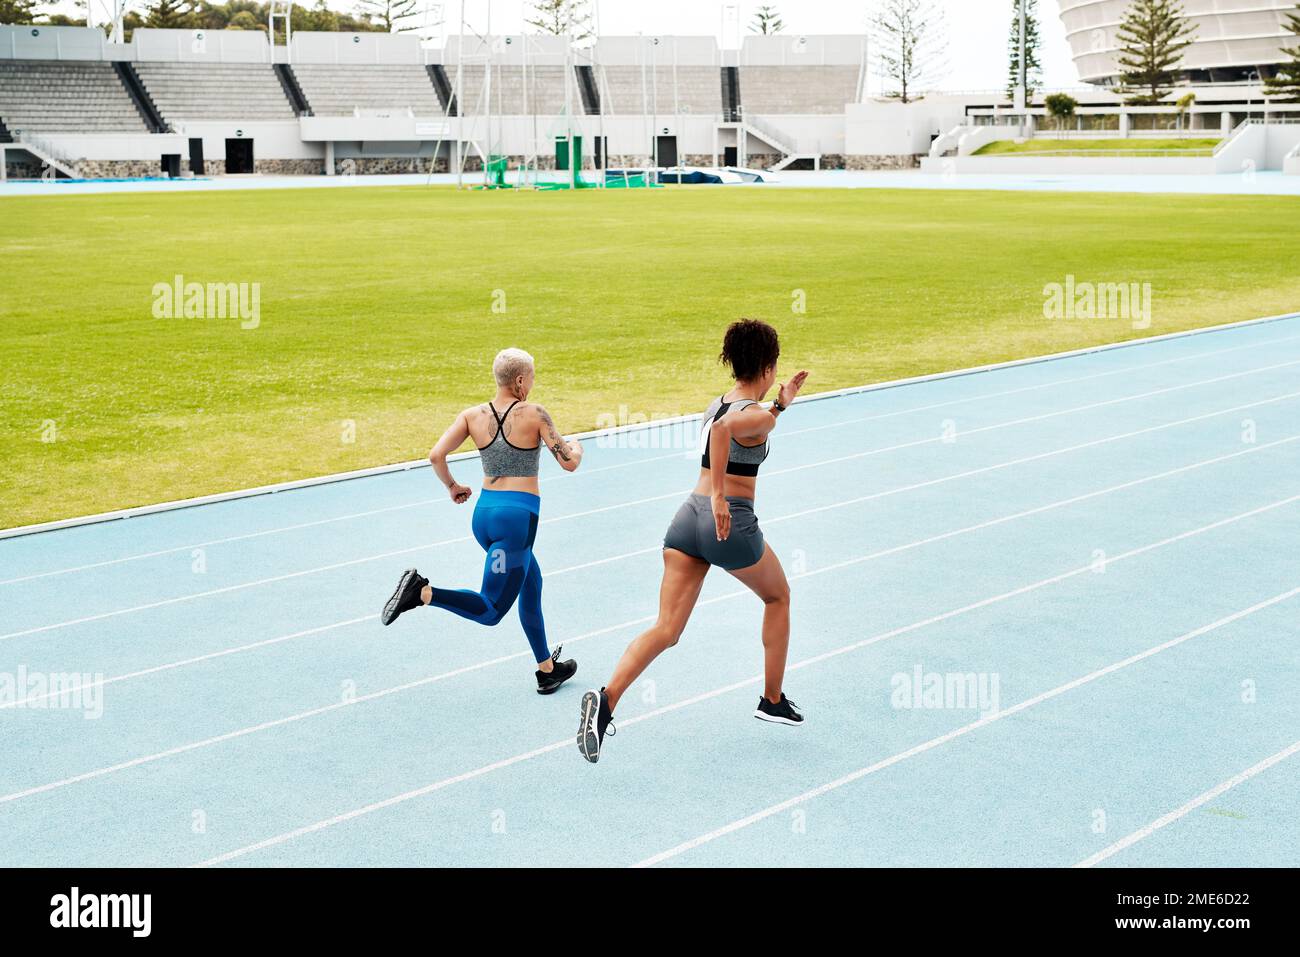 Competition is necessary. Full length shot of two attractive young athletes running a track field together during an outdoor workout session. Stock Photo